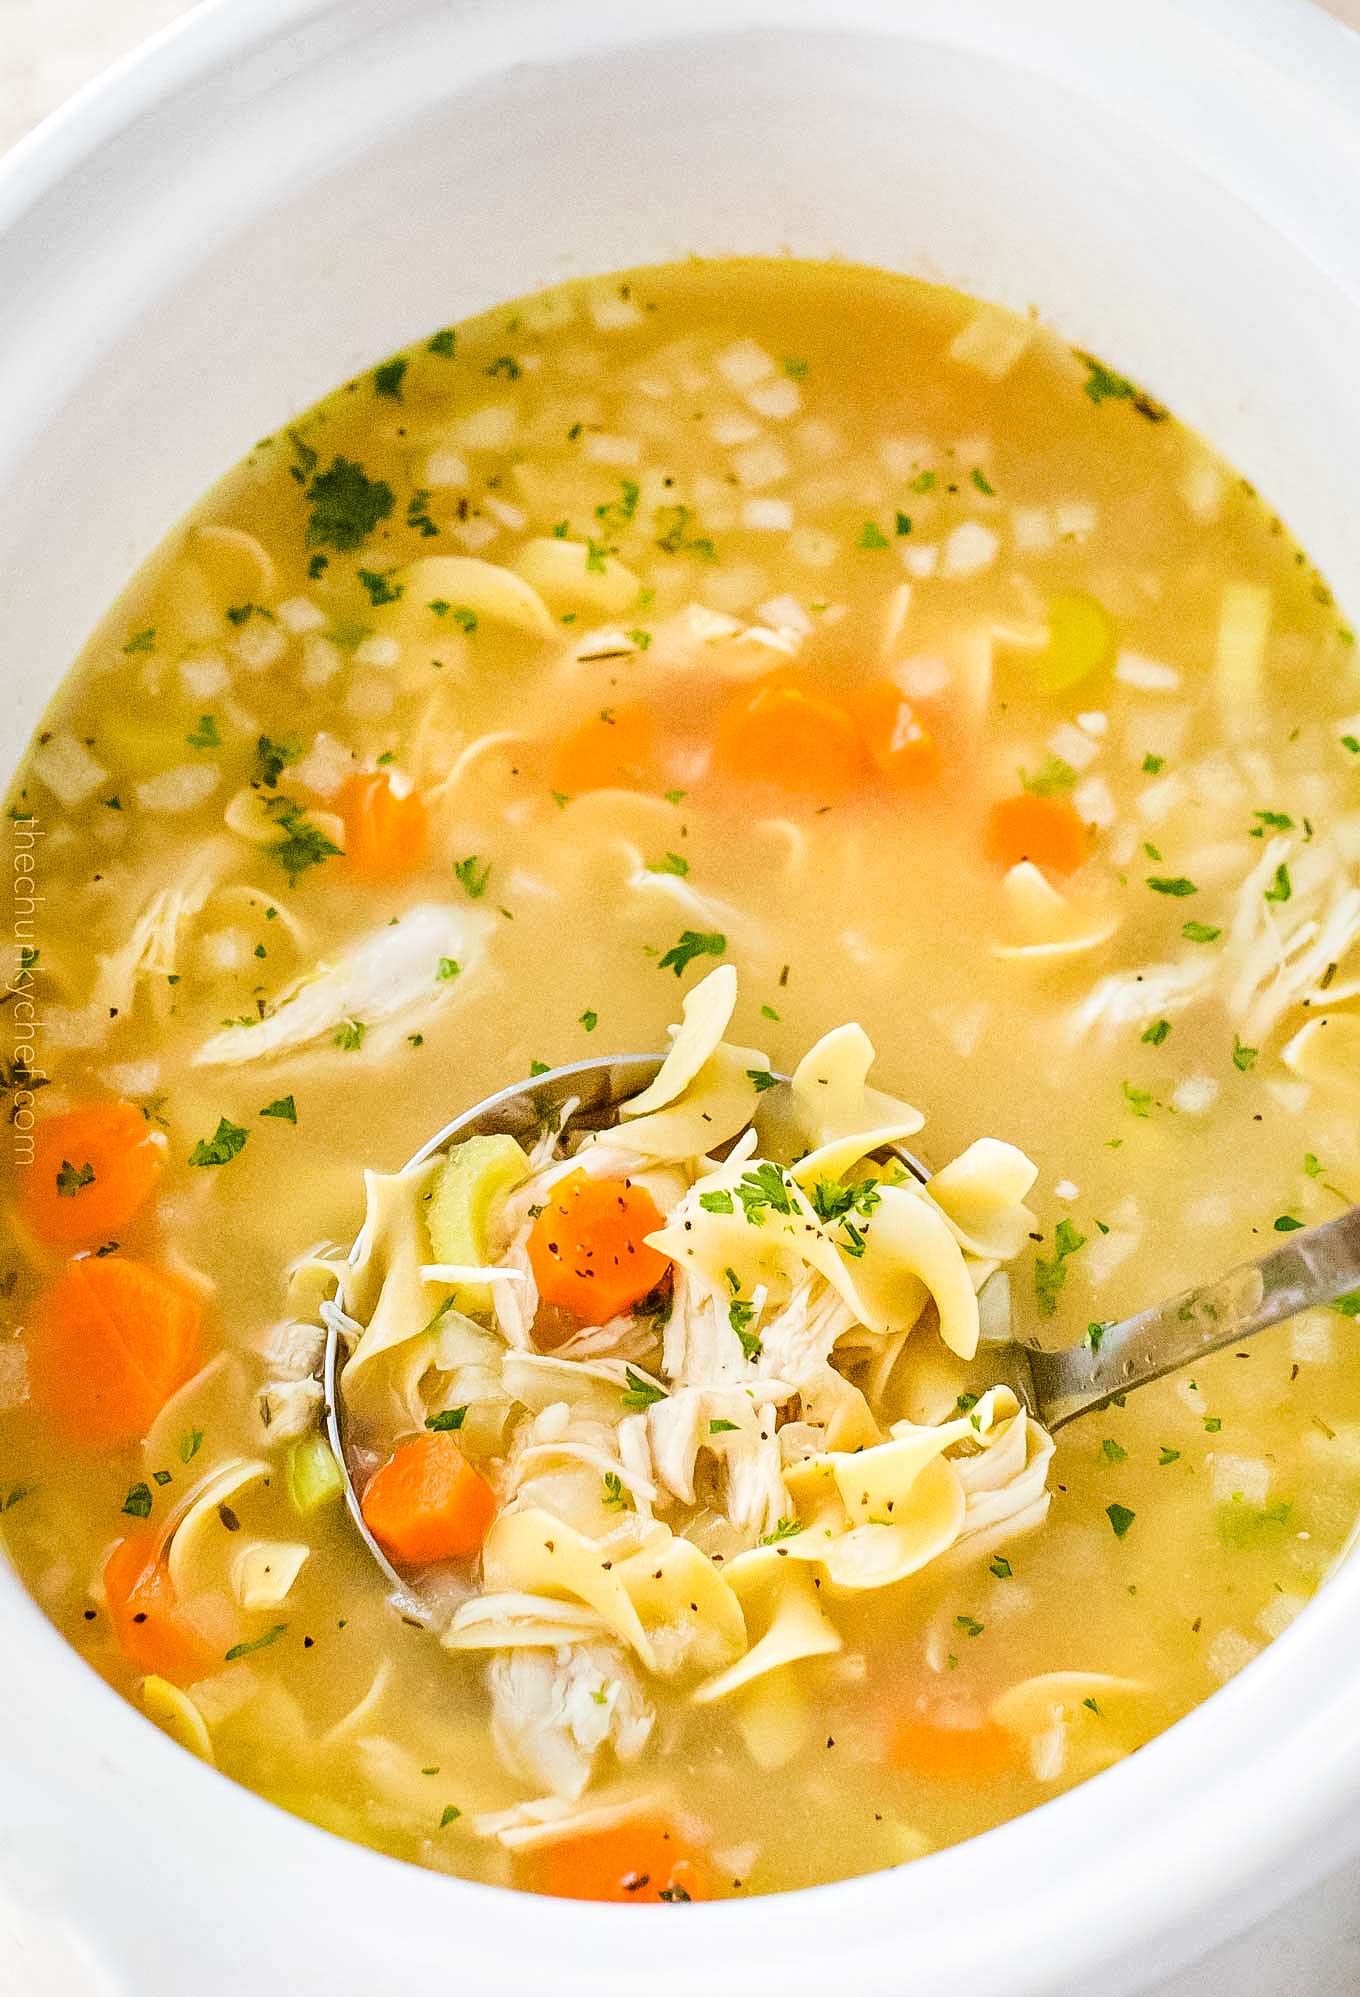 Homemade Crockpot Chicken Noodle Soup - The Chunky Chef